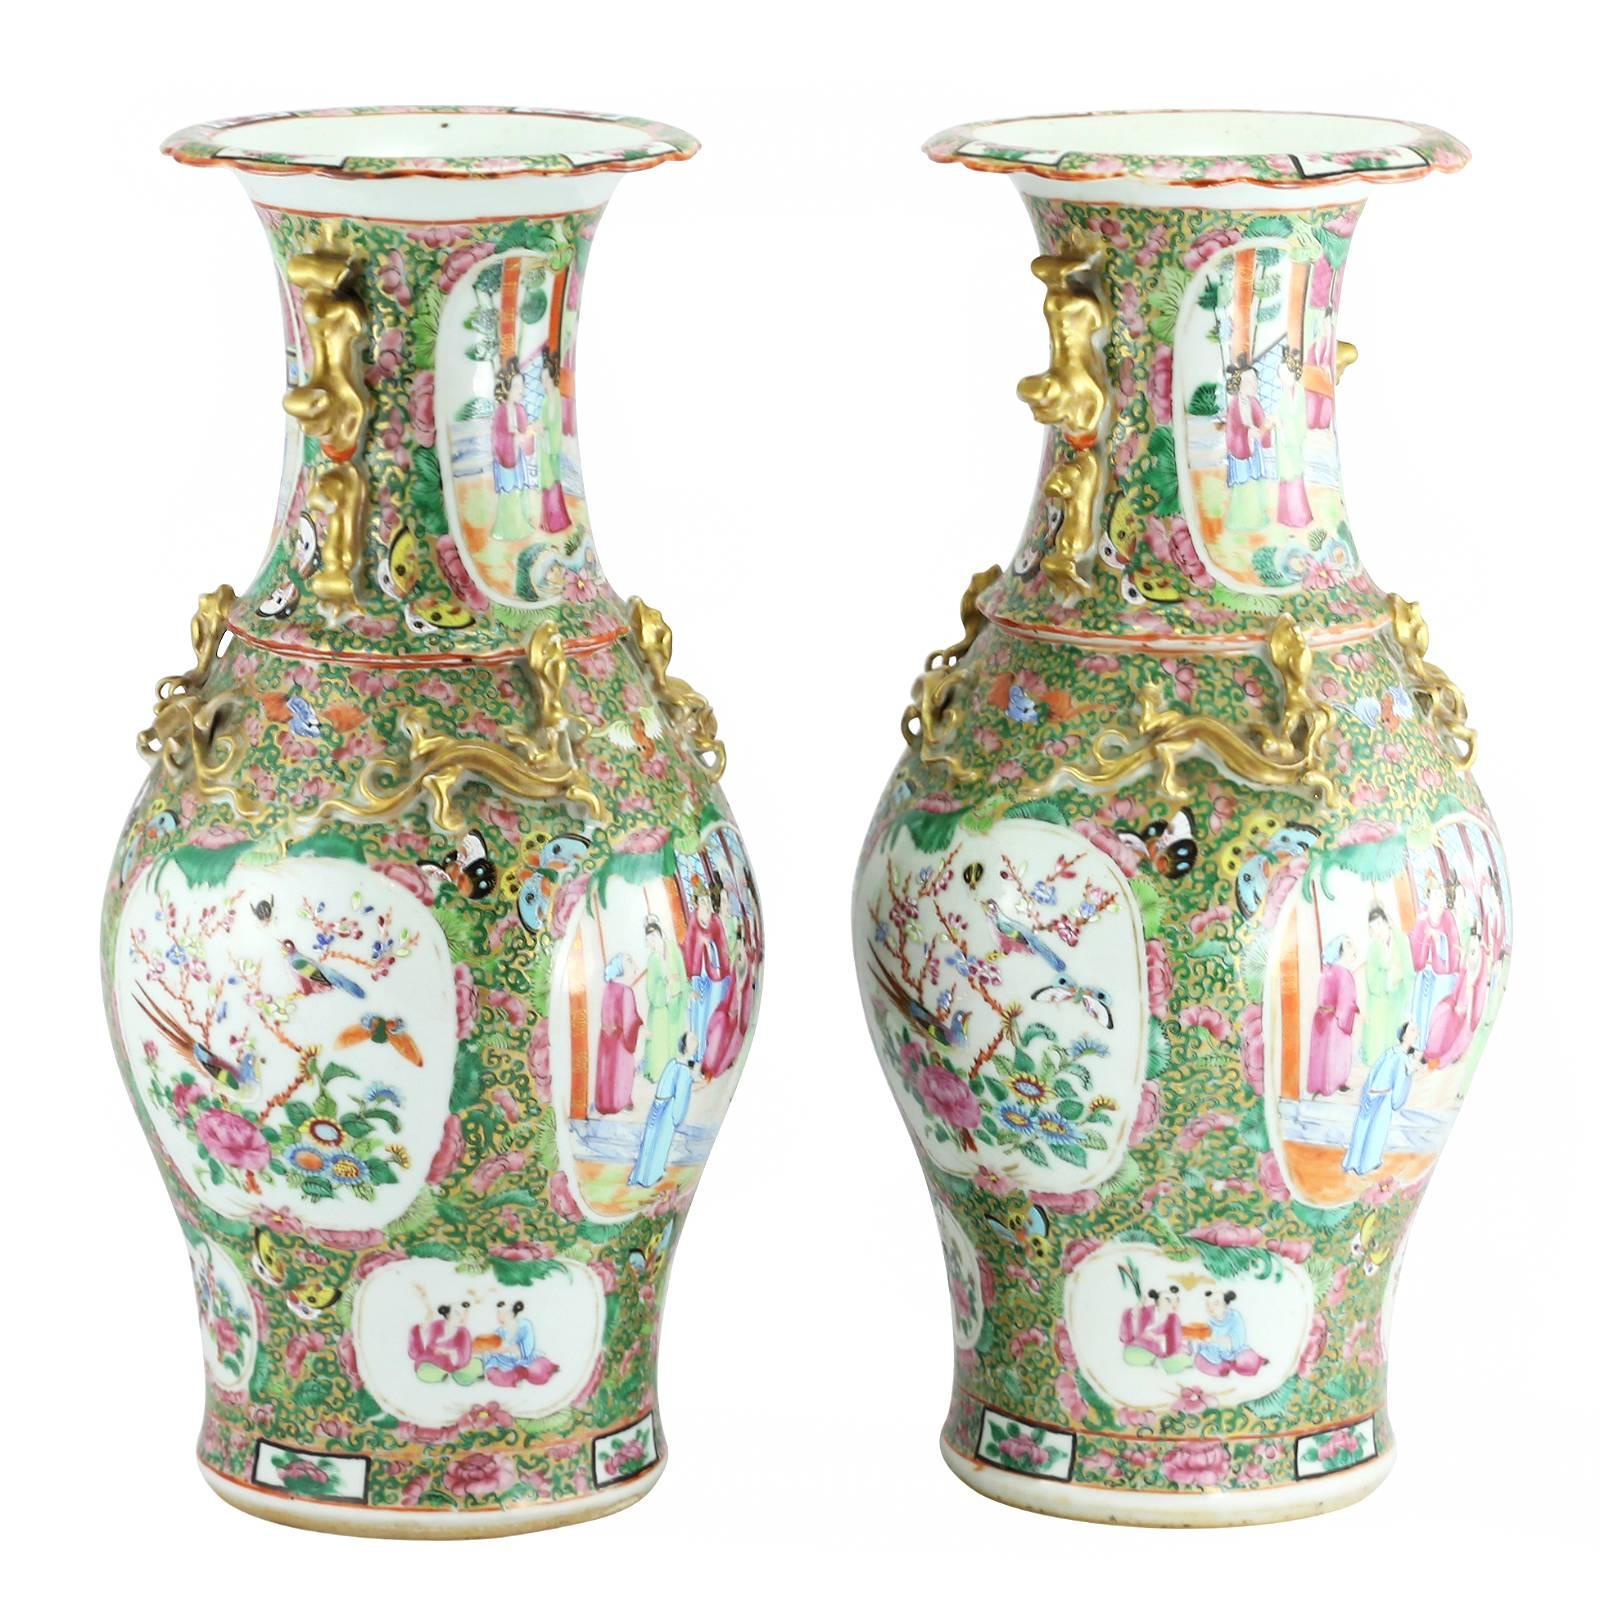 Porcelain Pair of 19th Century Chinese Qing Dynasty Famille Rose Vases